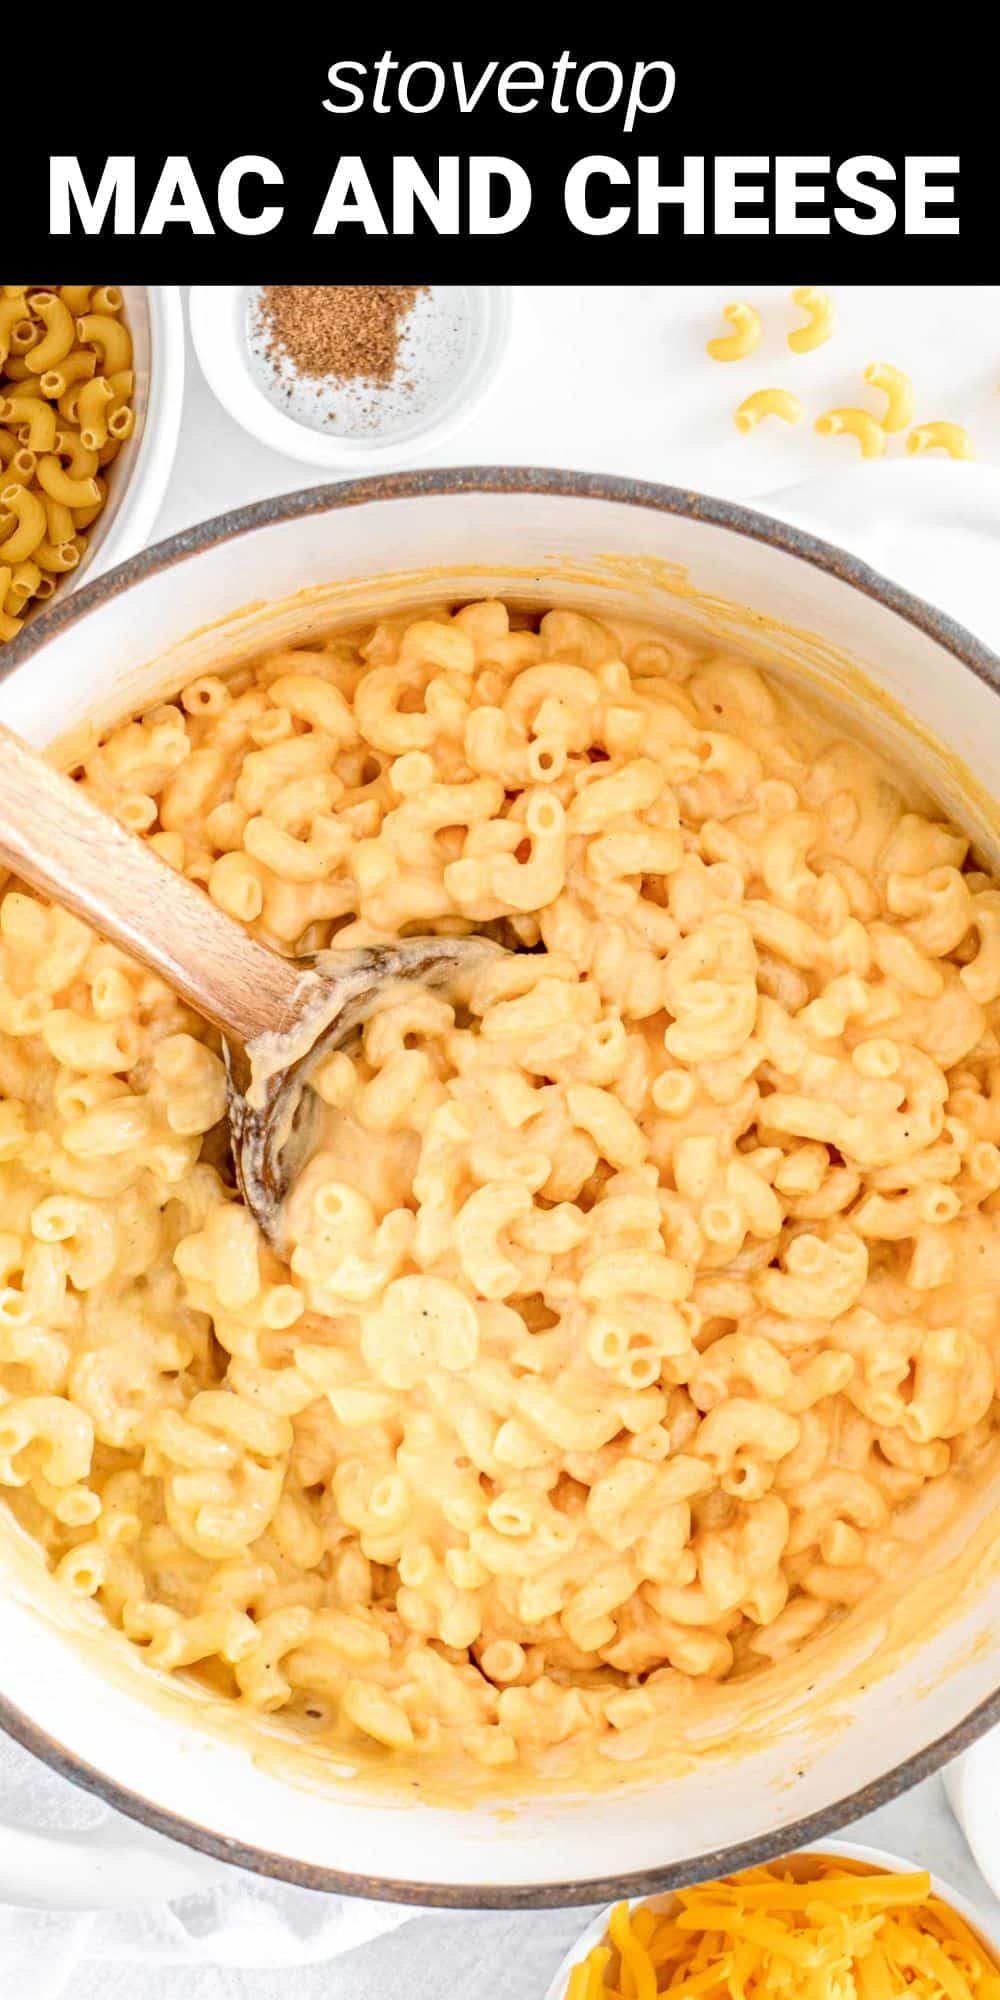 Skip the oven and make a Stovetop Mac and Cheese that’s quicker, easier, and downright irresistible. Made with tender pasta bathed in a creamy cheese sauce, it will keep everyone coming back for more.